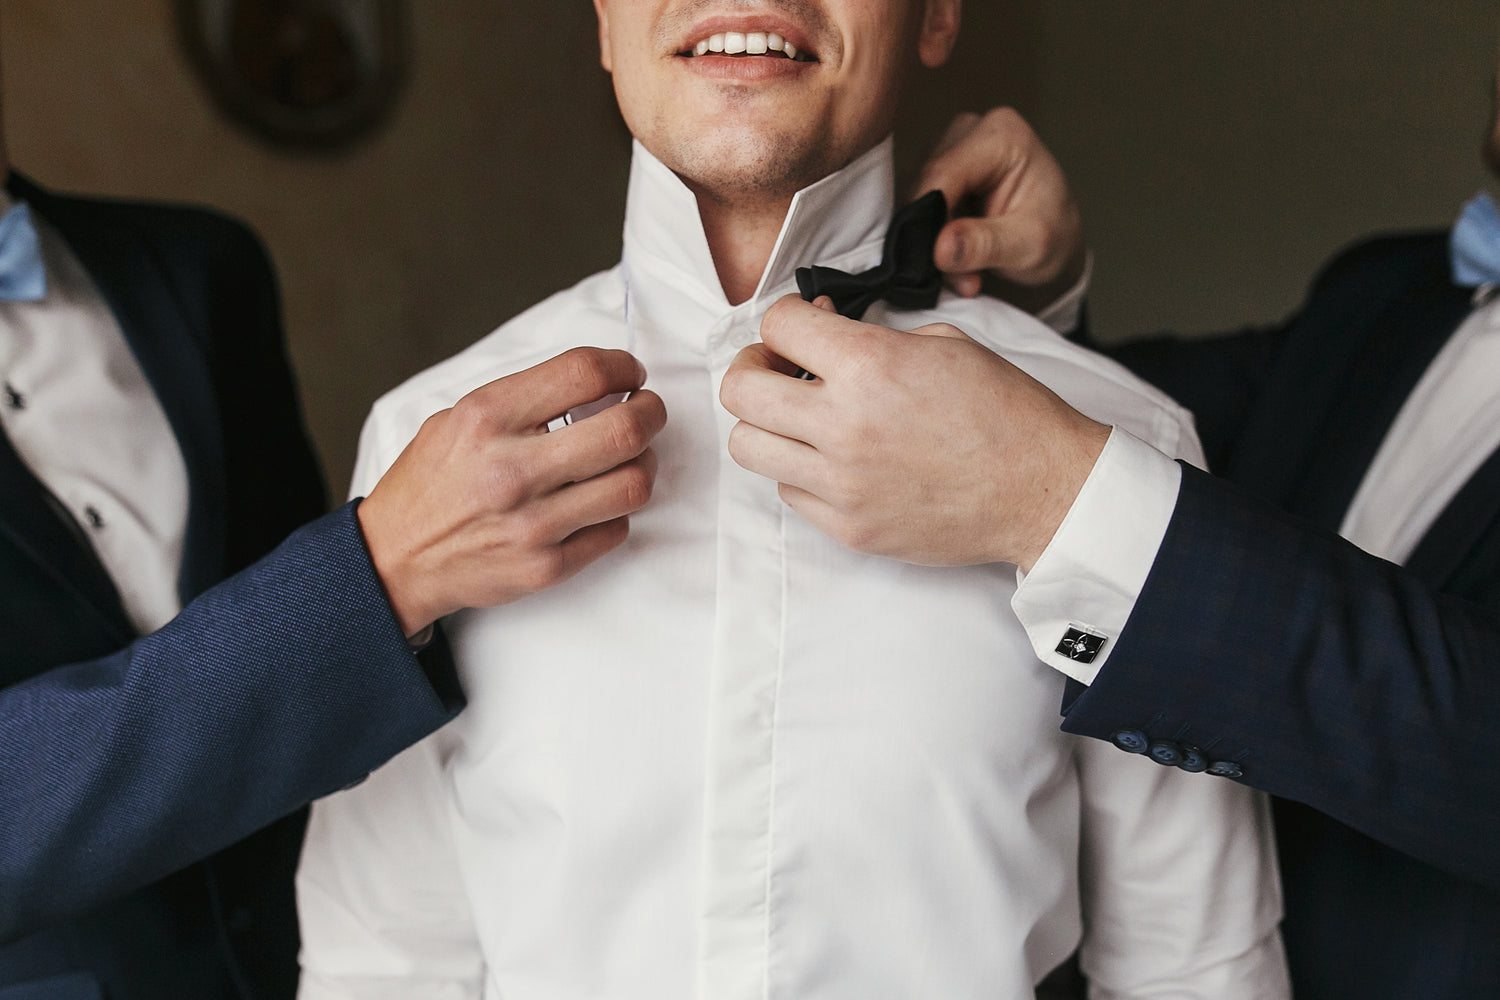 Foolproof Men's Fashion Tips For Your Friend's Wedding - XSuit